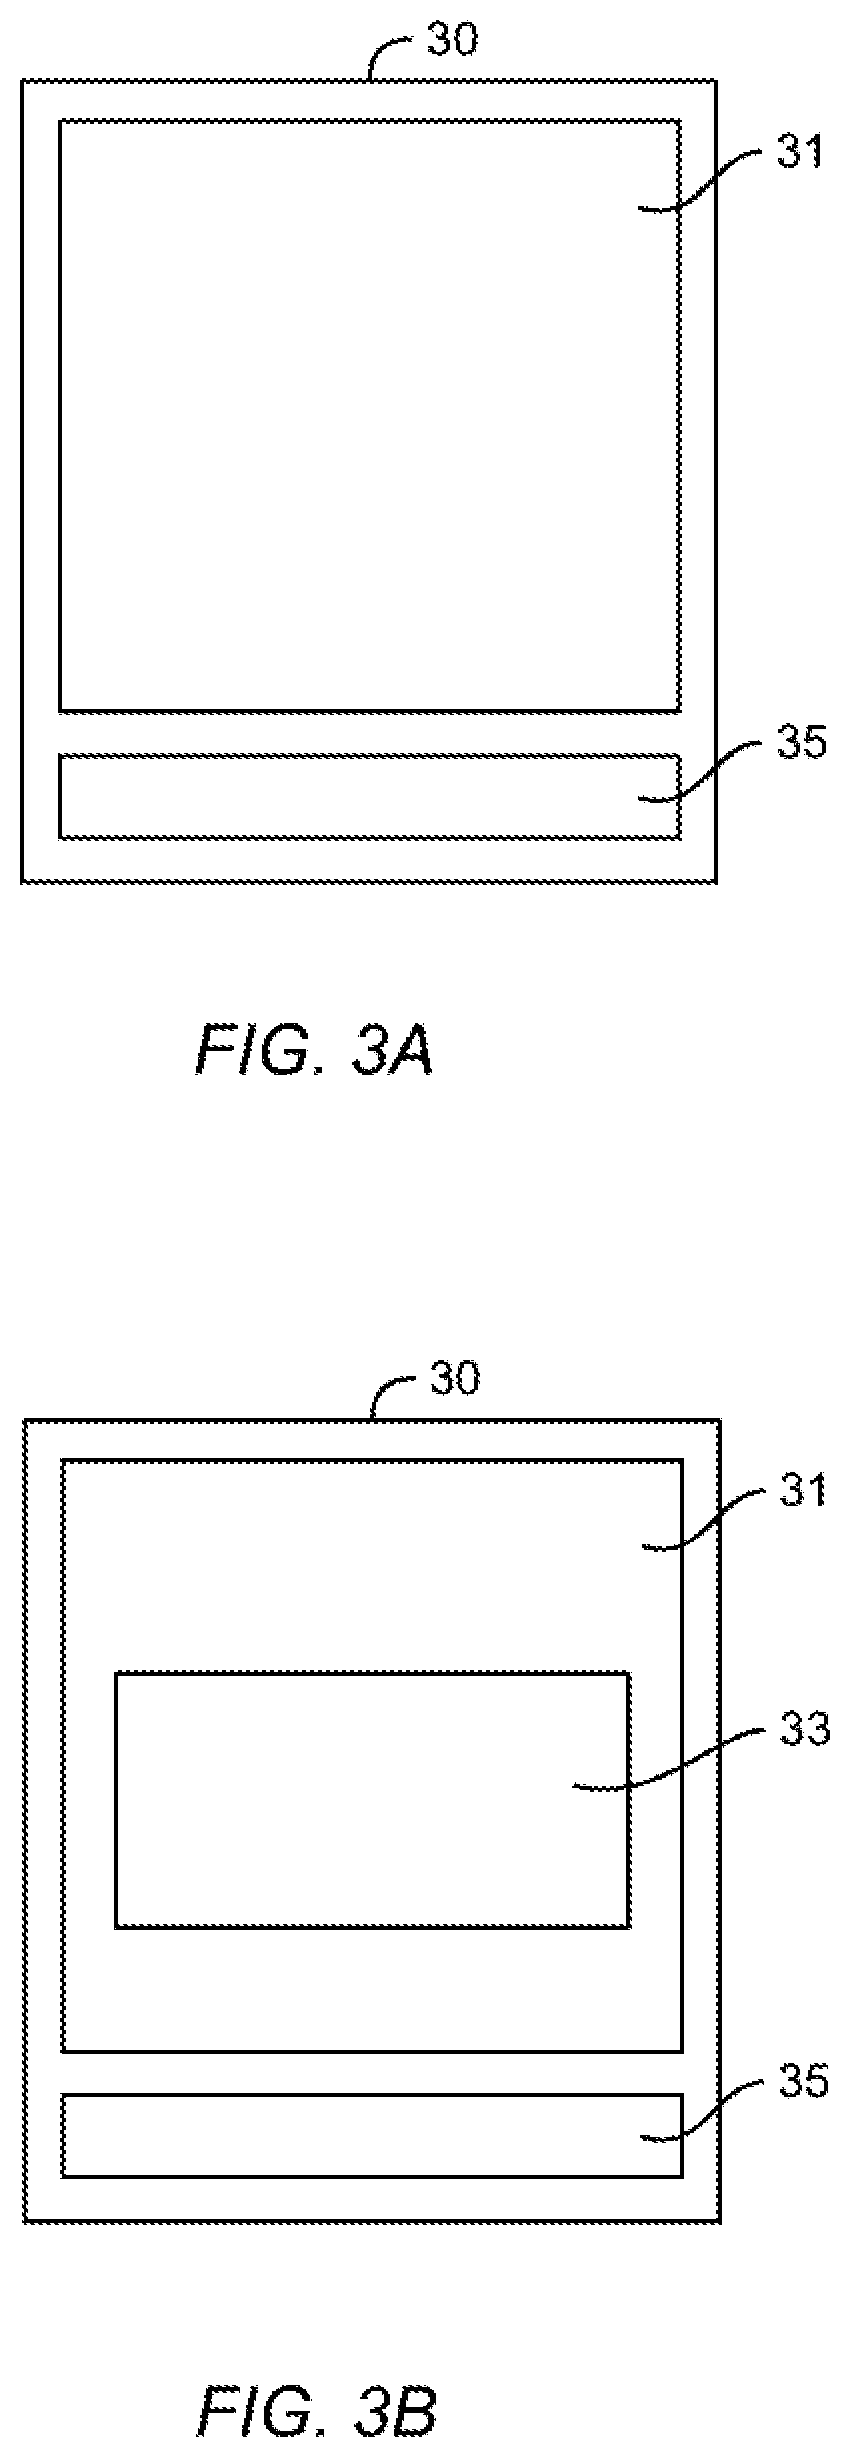 Method and apparatus for configuring screen displays